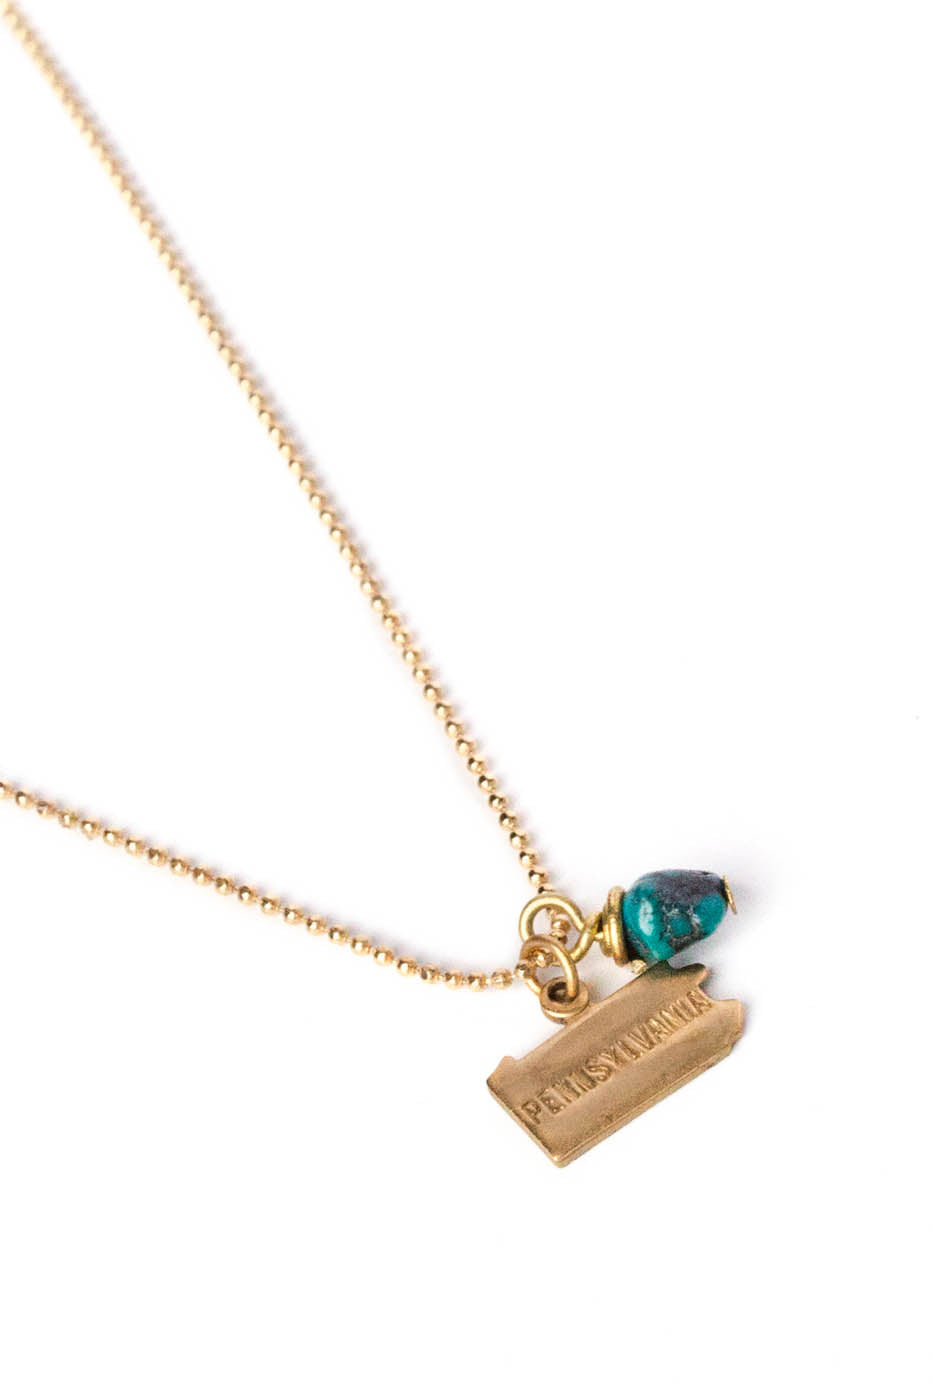 State Charm Necklace w/ Turquoise Nugget on Gold Ball Chain